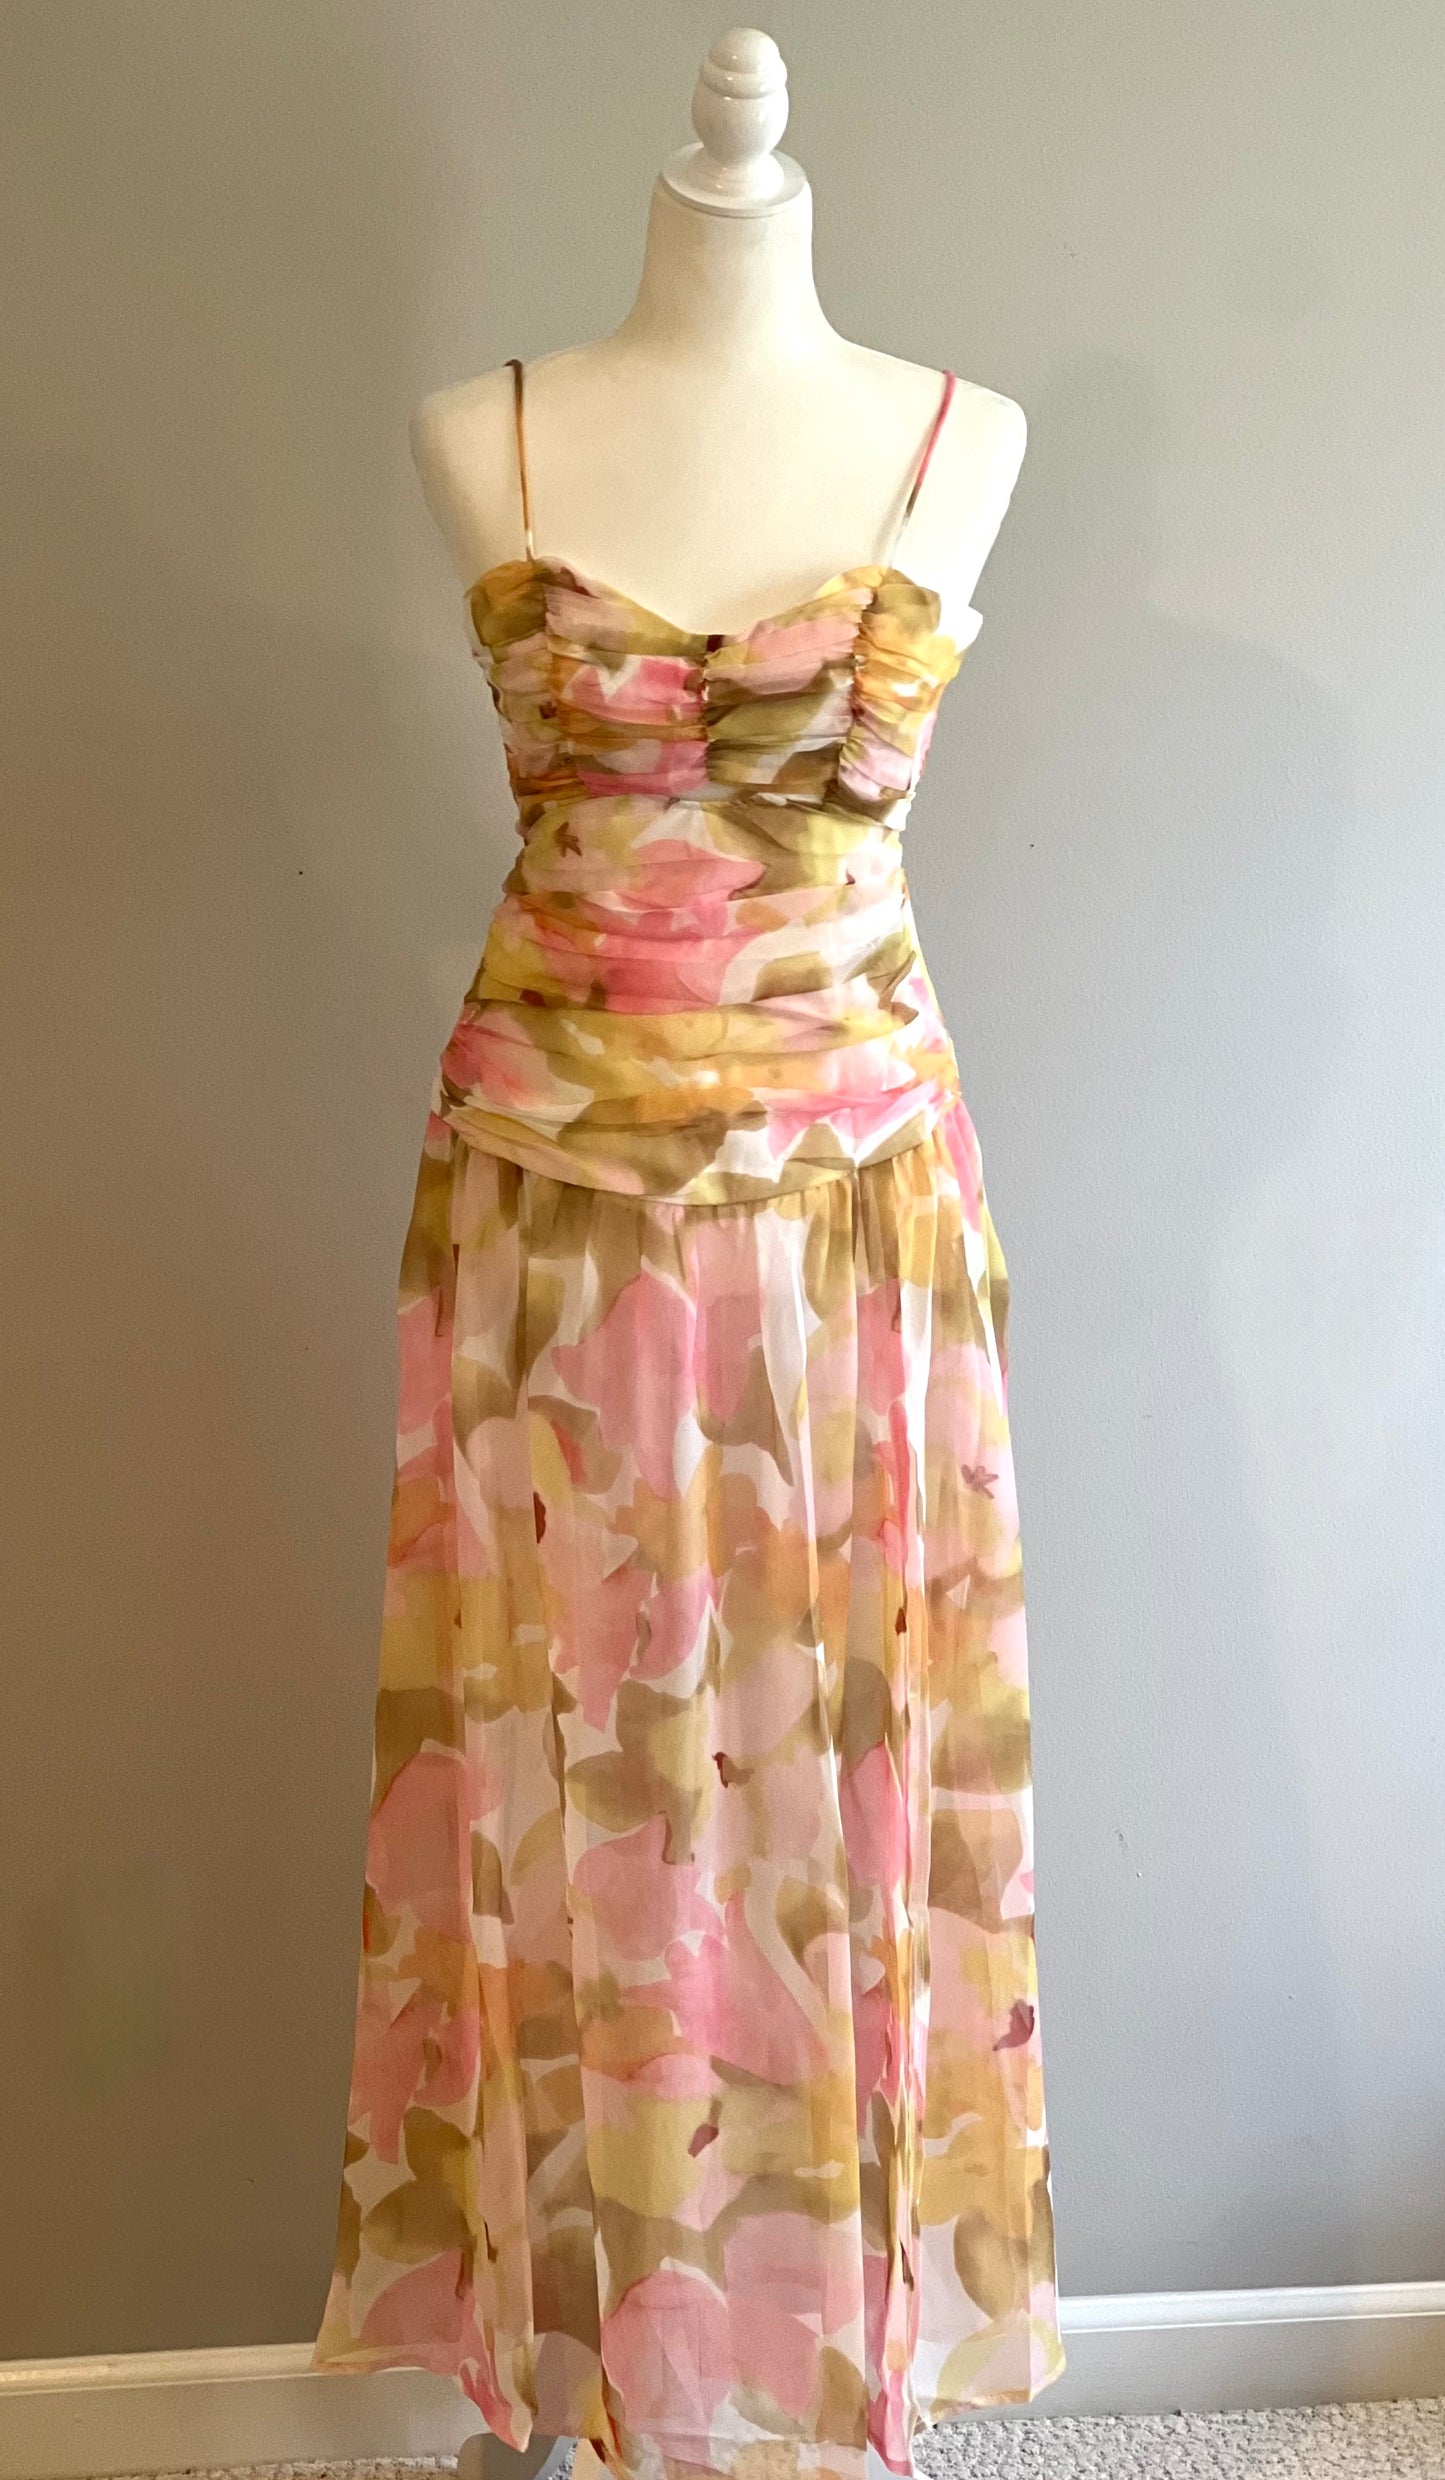 PINK AND YELLOW FLORAL MIDI DRESS